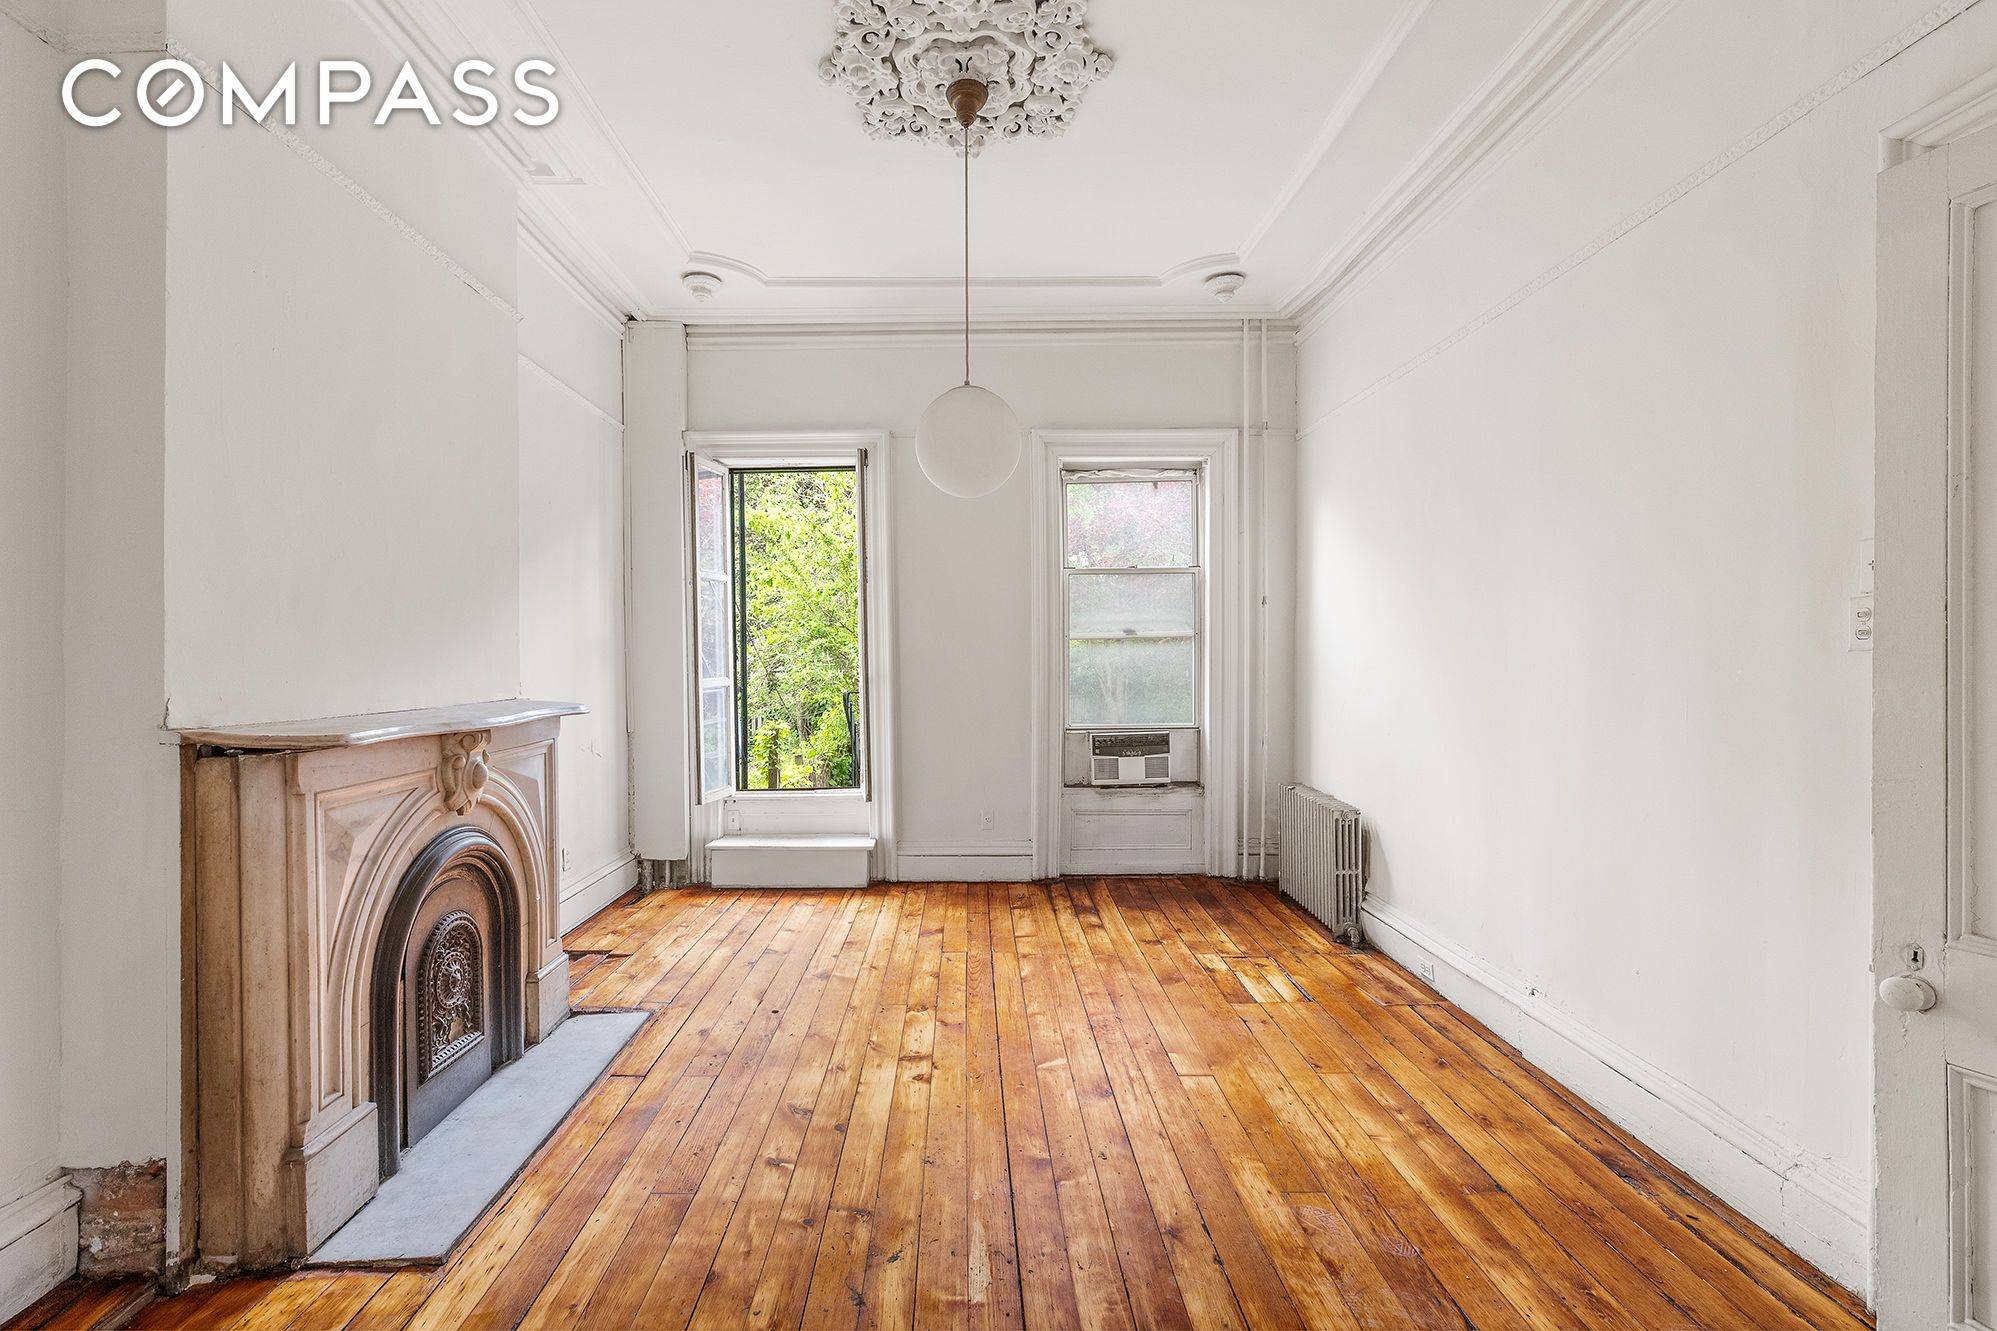 Seize the opportunity to transform this historic gem into the home of your dreams.